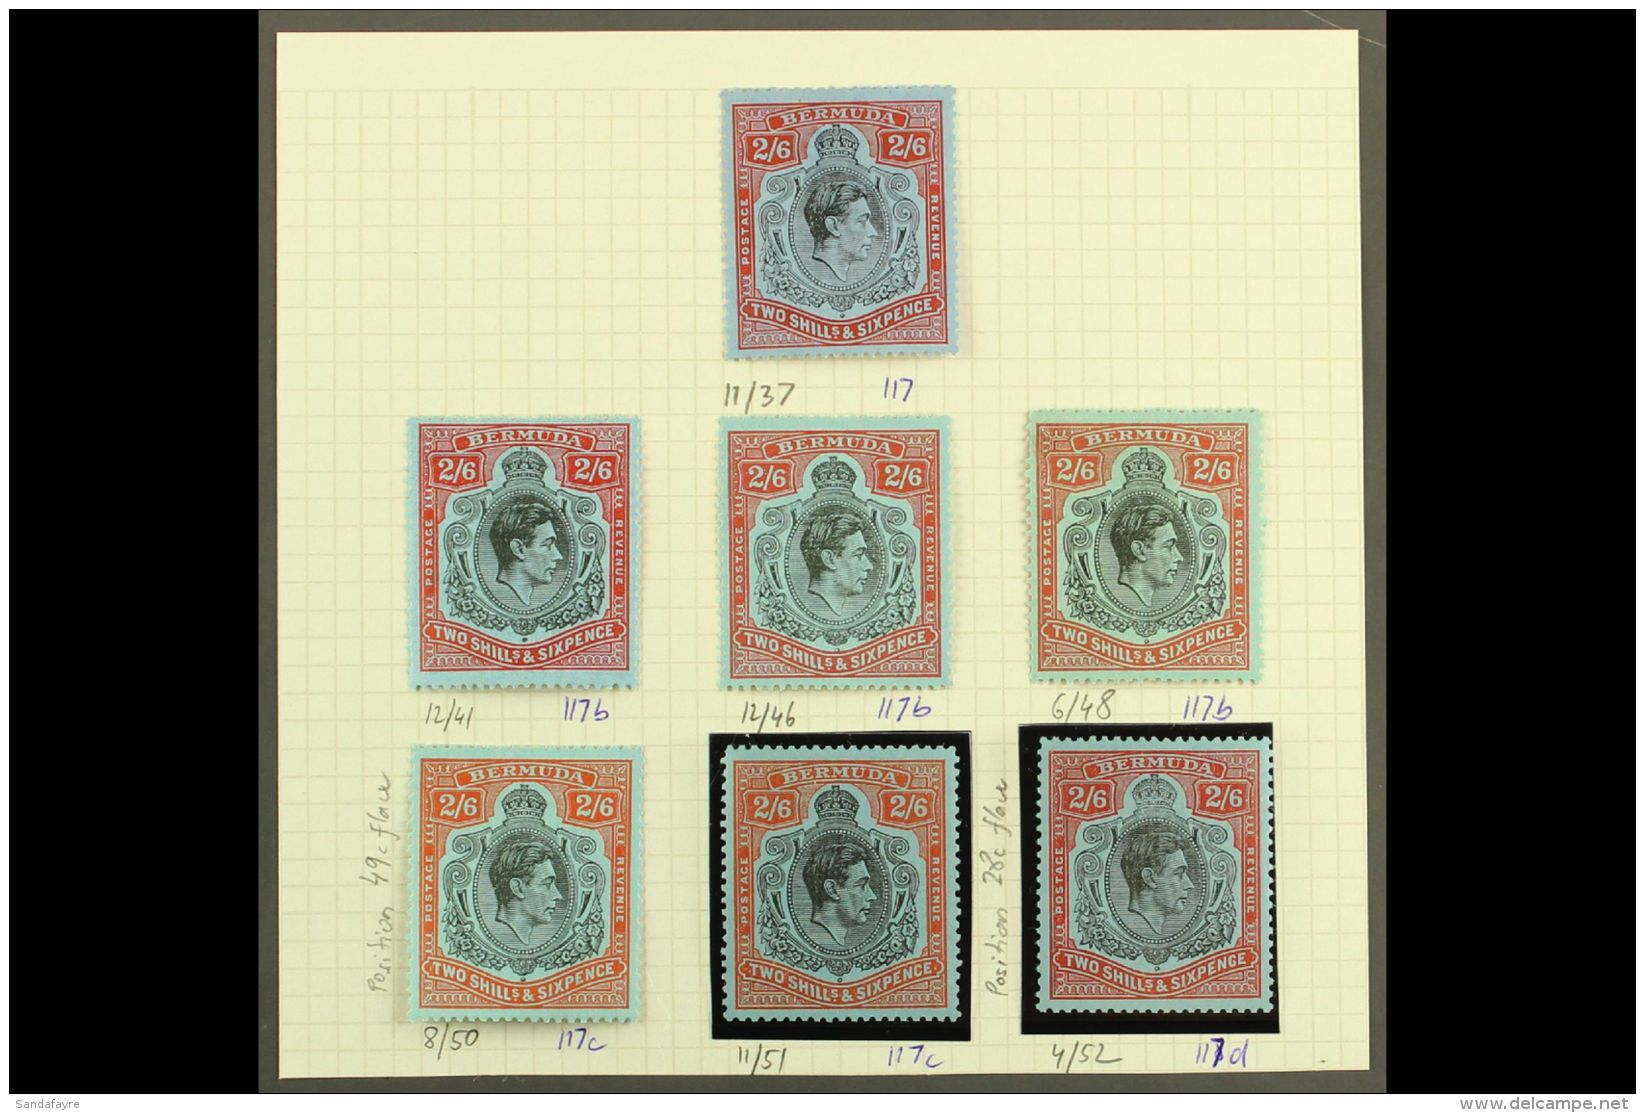 1938-52 KING GEORGE VI 2s6d KEY TYPES A Very Fine Mint Group With Identified Printings, Includes The Original 1938... - Bermuda